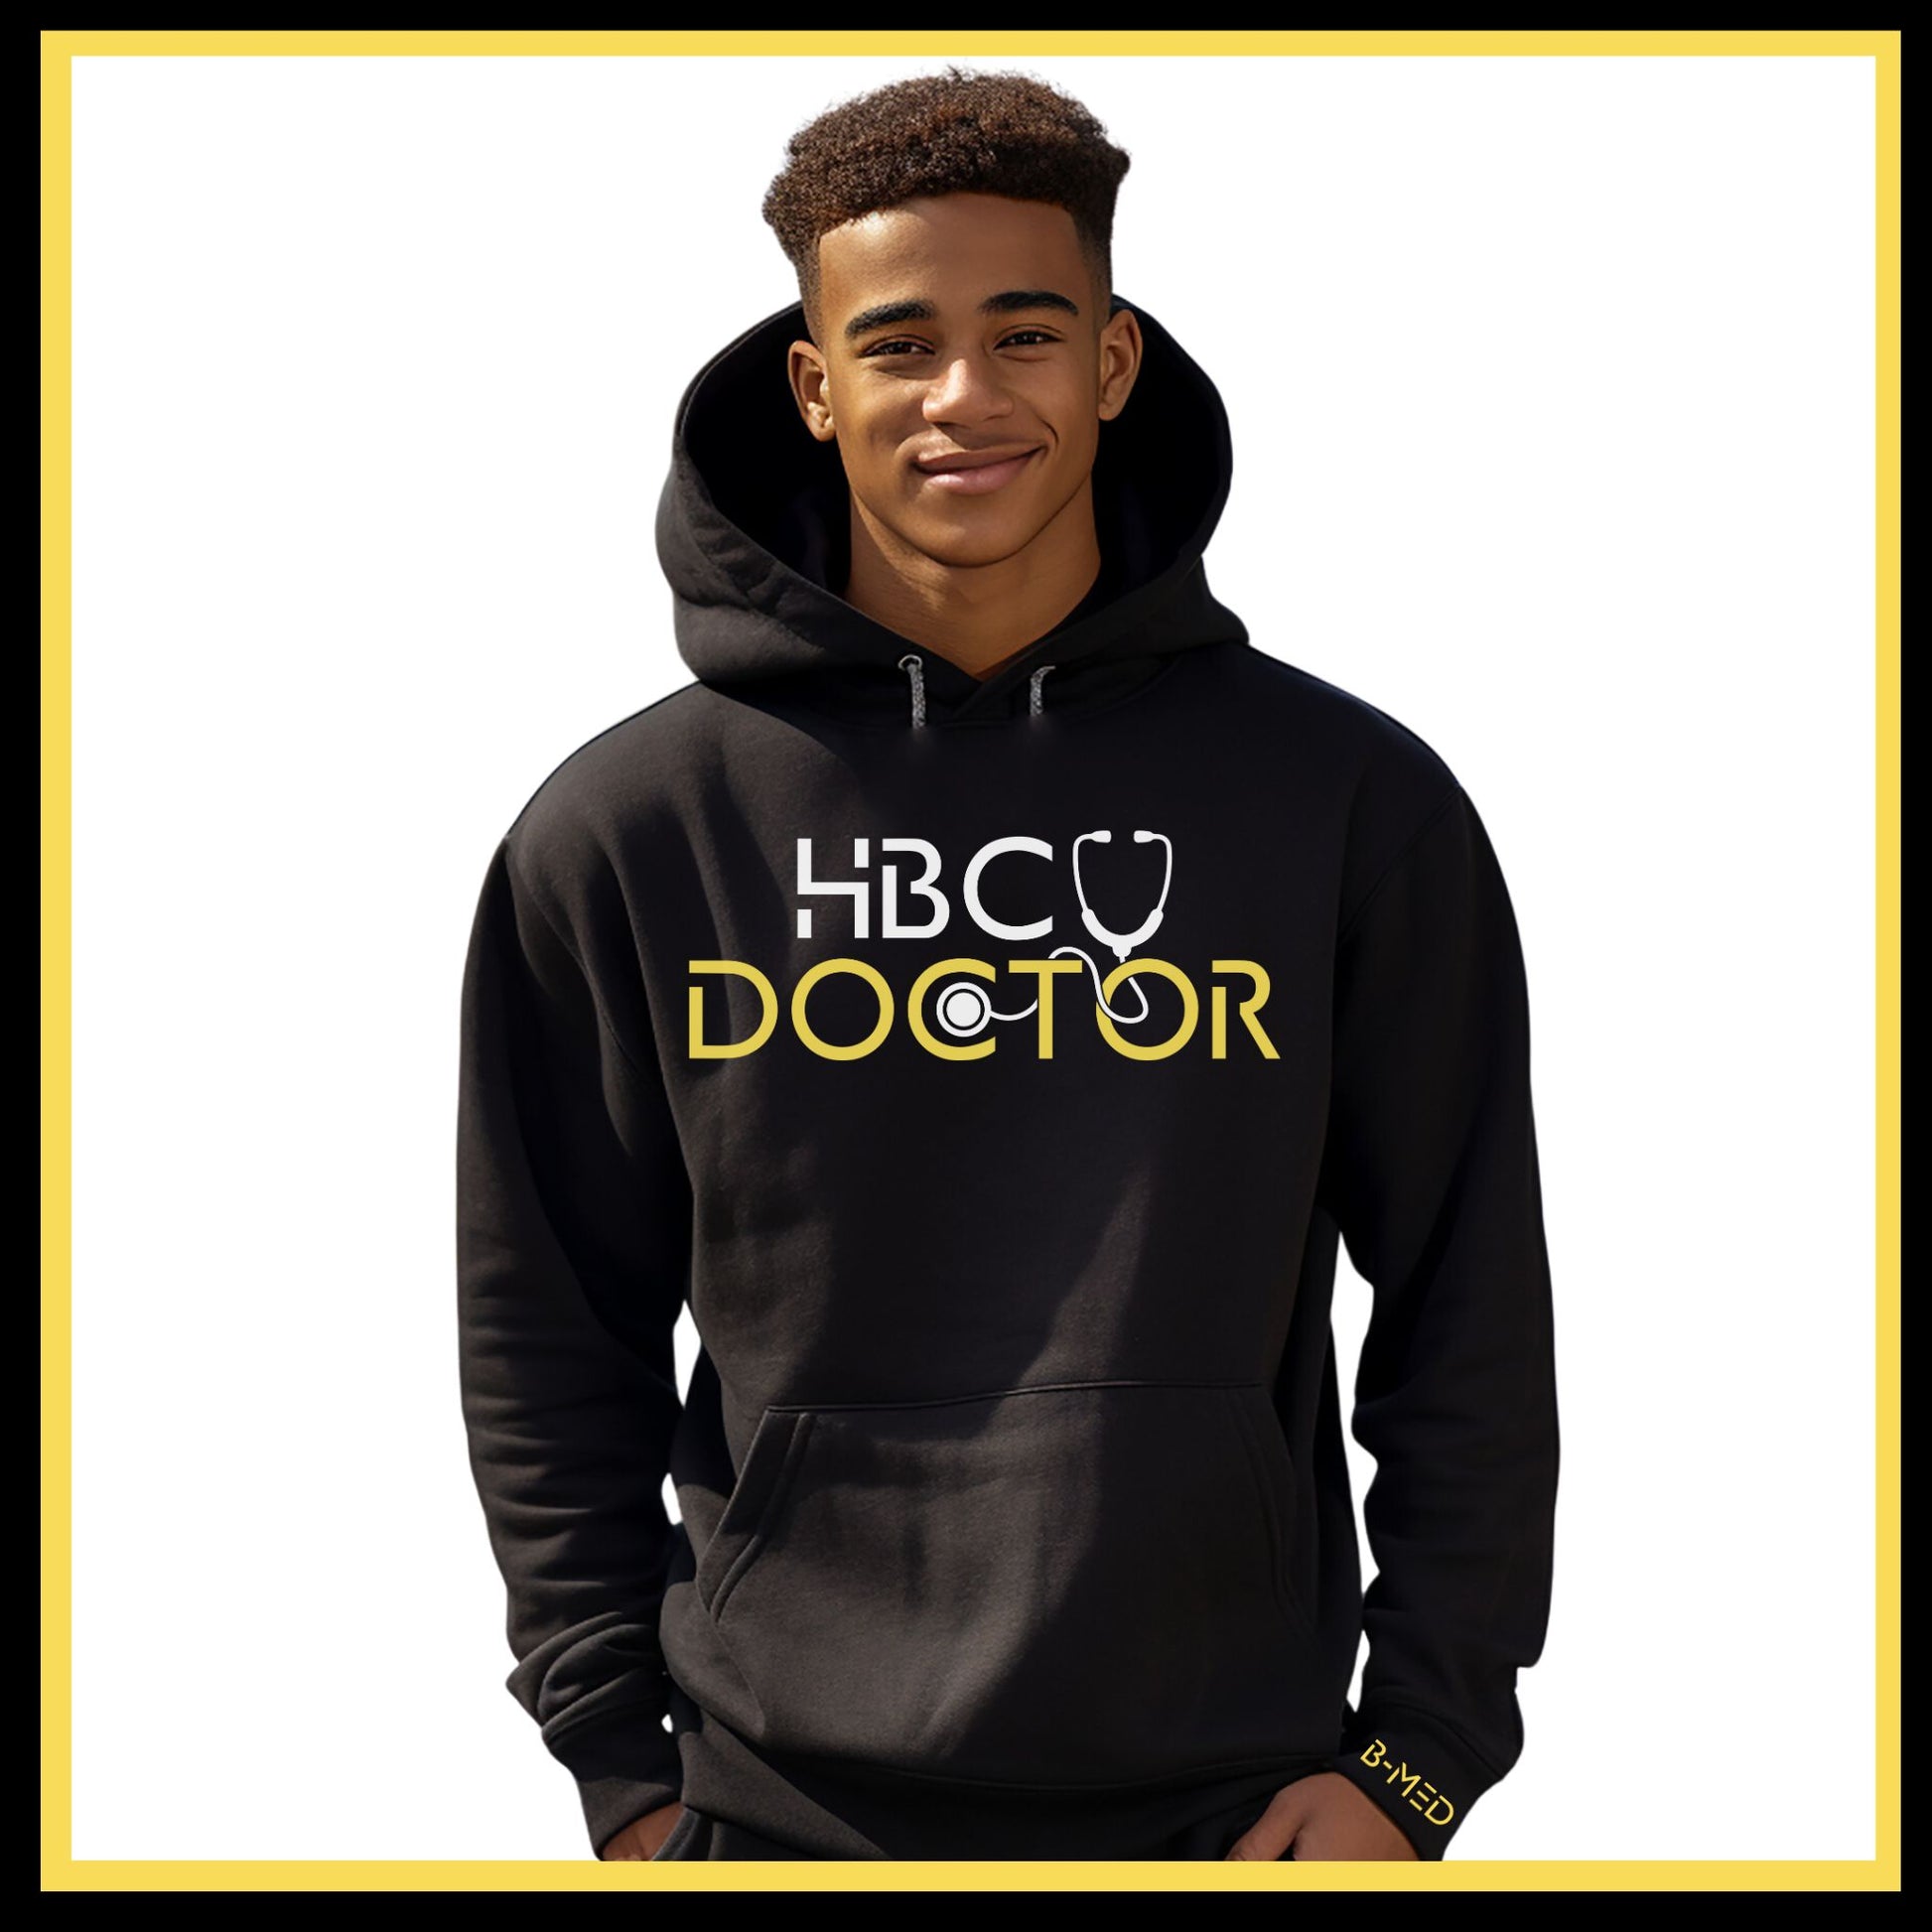 Black Hoodie featuring HBCU Doctor design, perfect for showcasing pride in Historically Black Colleges and Universities.